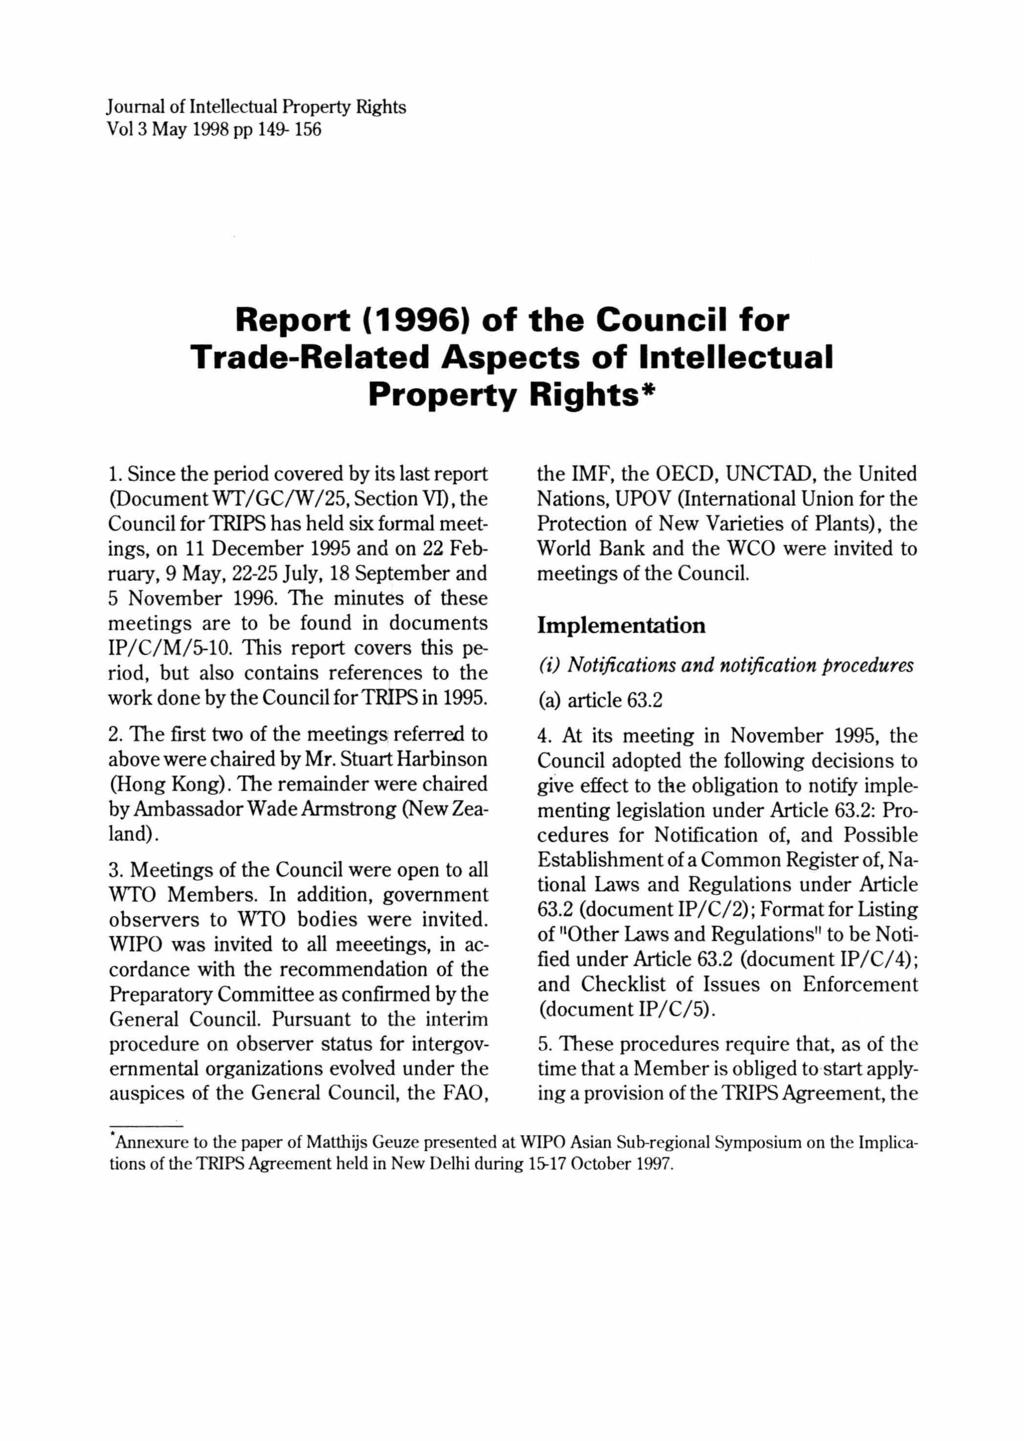 Journal of Intellectual Property Rights Vol 3 May 1998 pp 149-156 Report (1996) of the Council for Trade-Related Aspects of Intellectual Property Rights* 1.